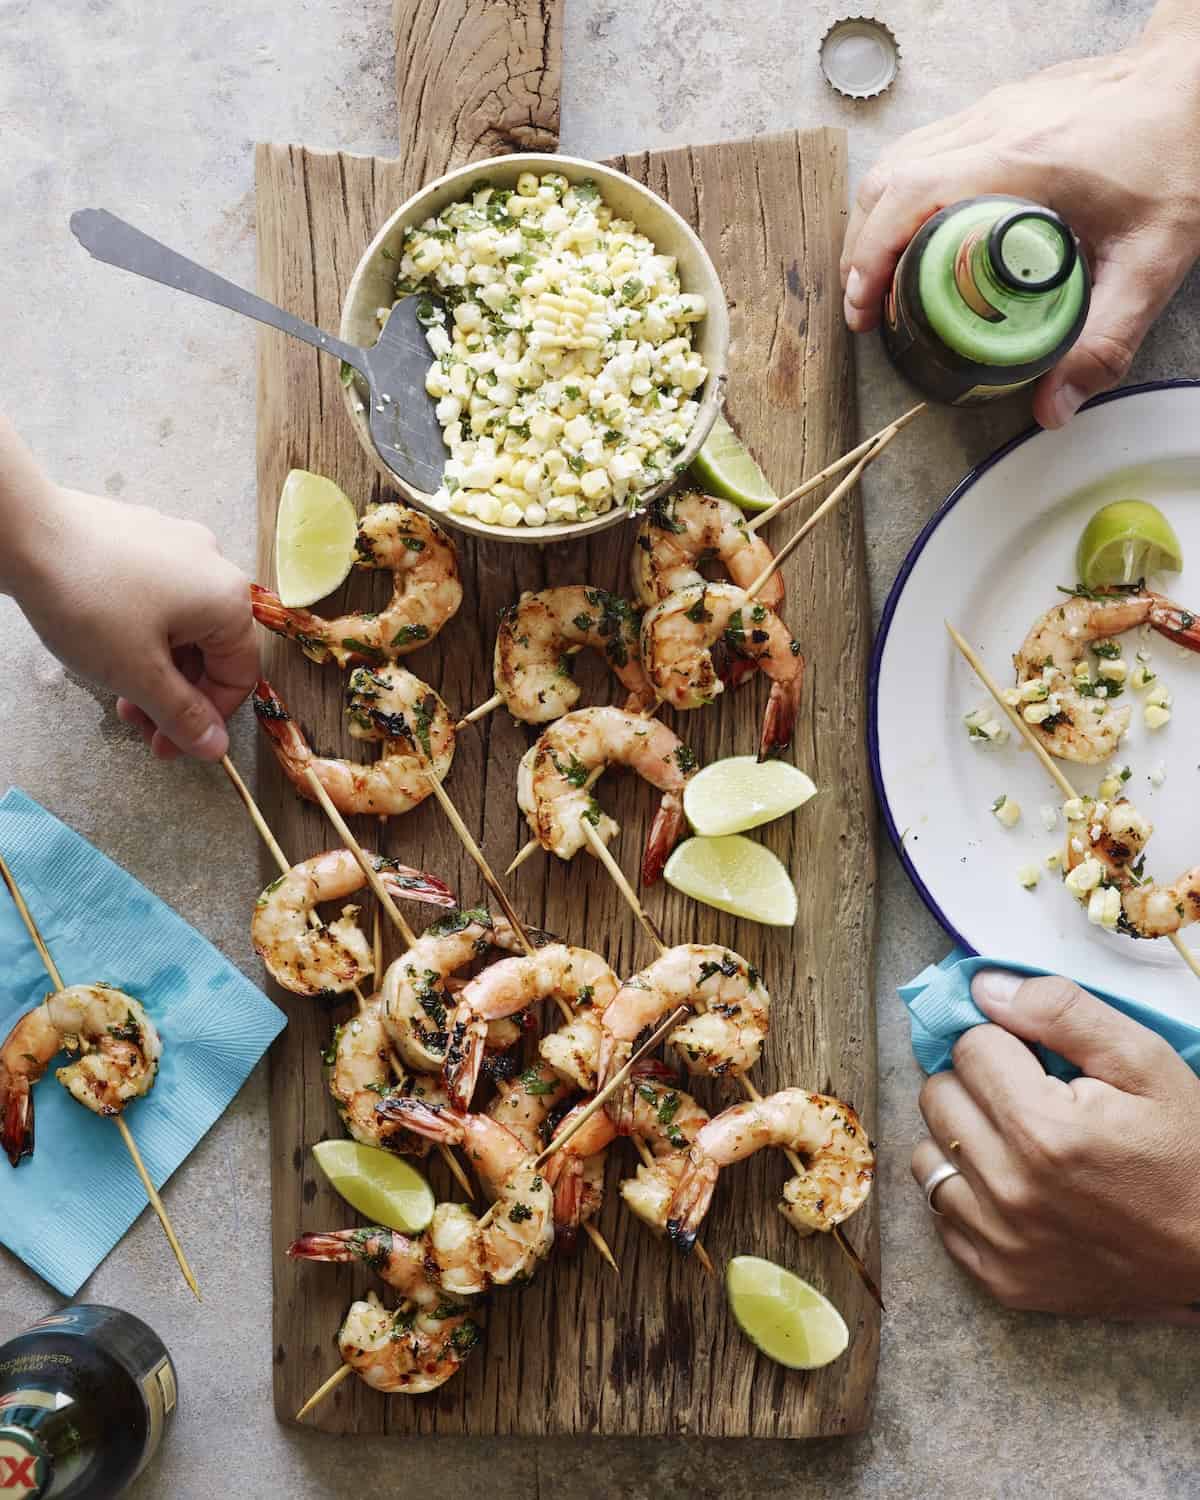 A wooden board with grilled mexican shrimp skewers with a bowl of corn salsa and lime wedges, along with a plate to serve and two beers next to it, along with a couple hands taking the skewers and beer.